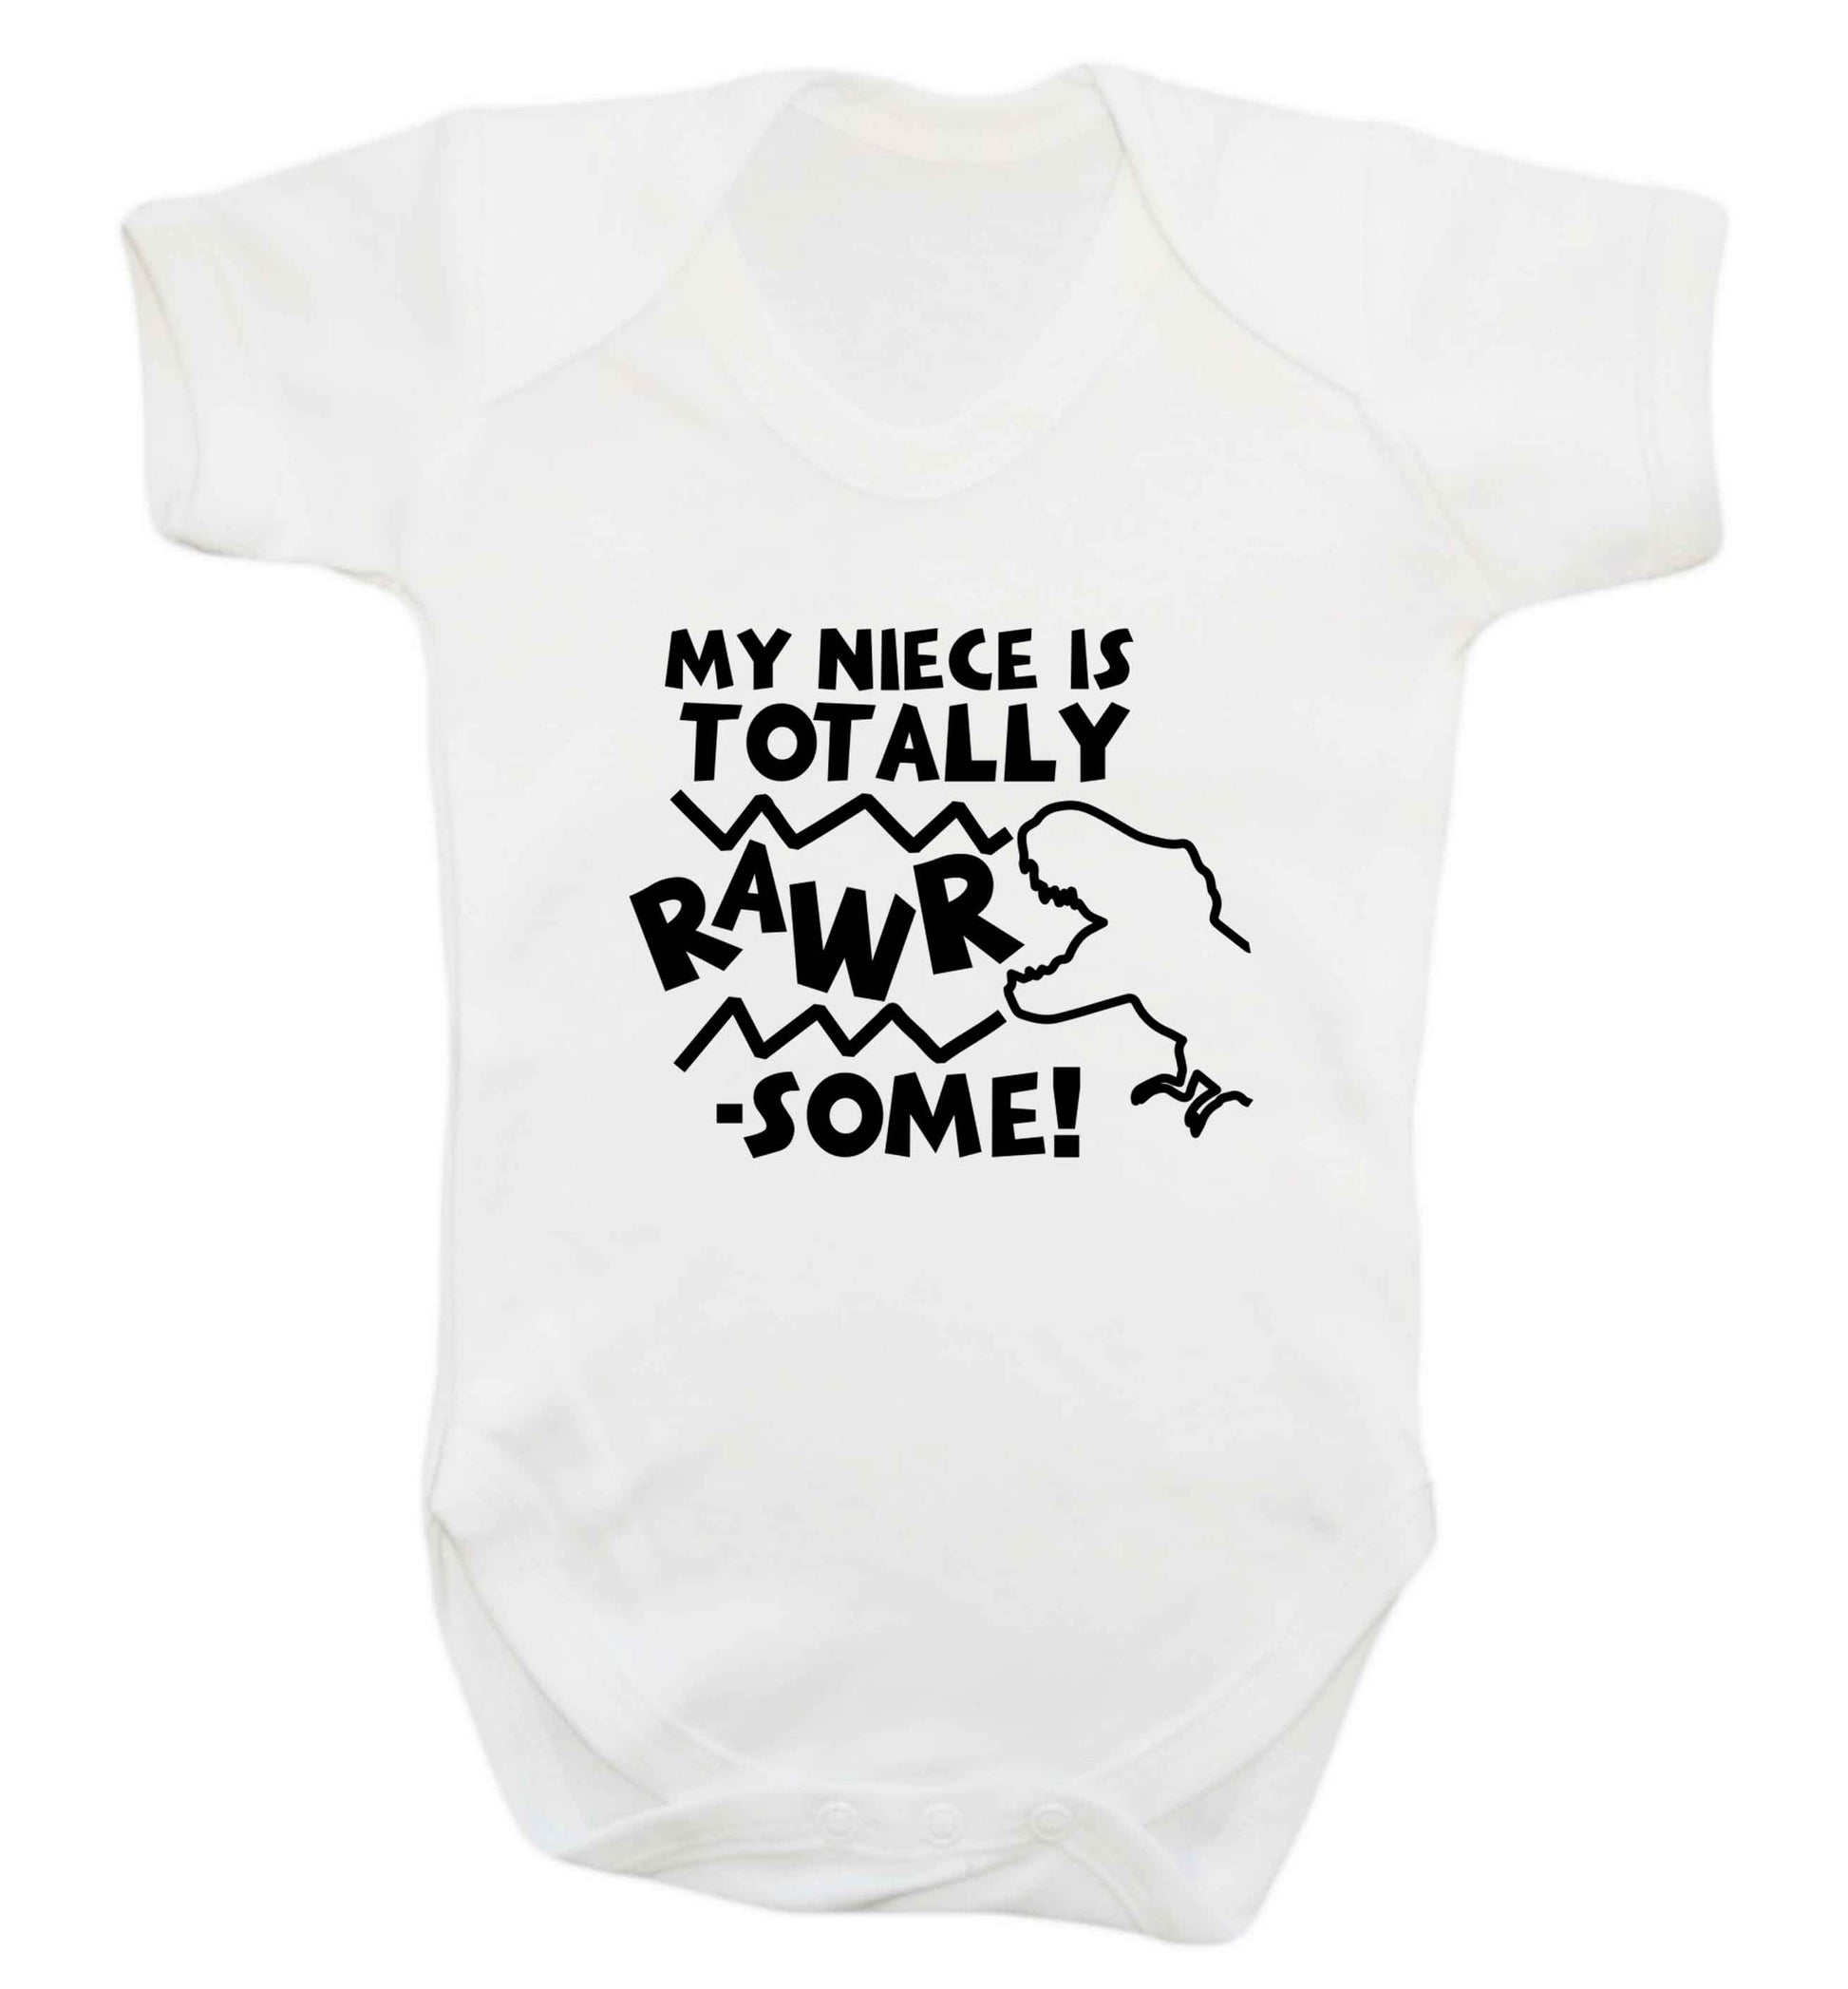 My niece is totally rawrsome baby vest white 18-24 months